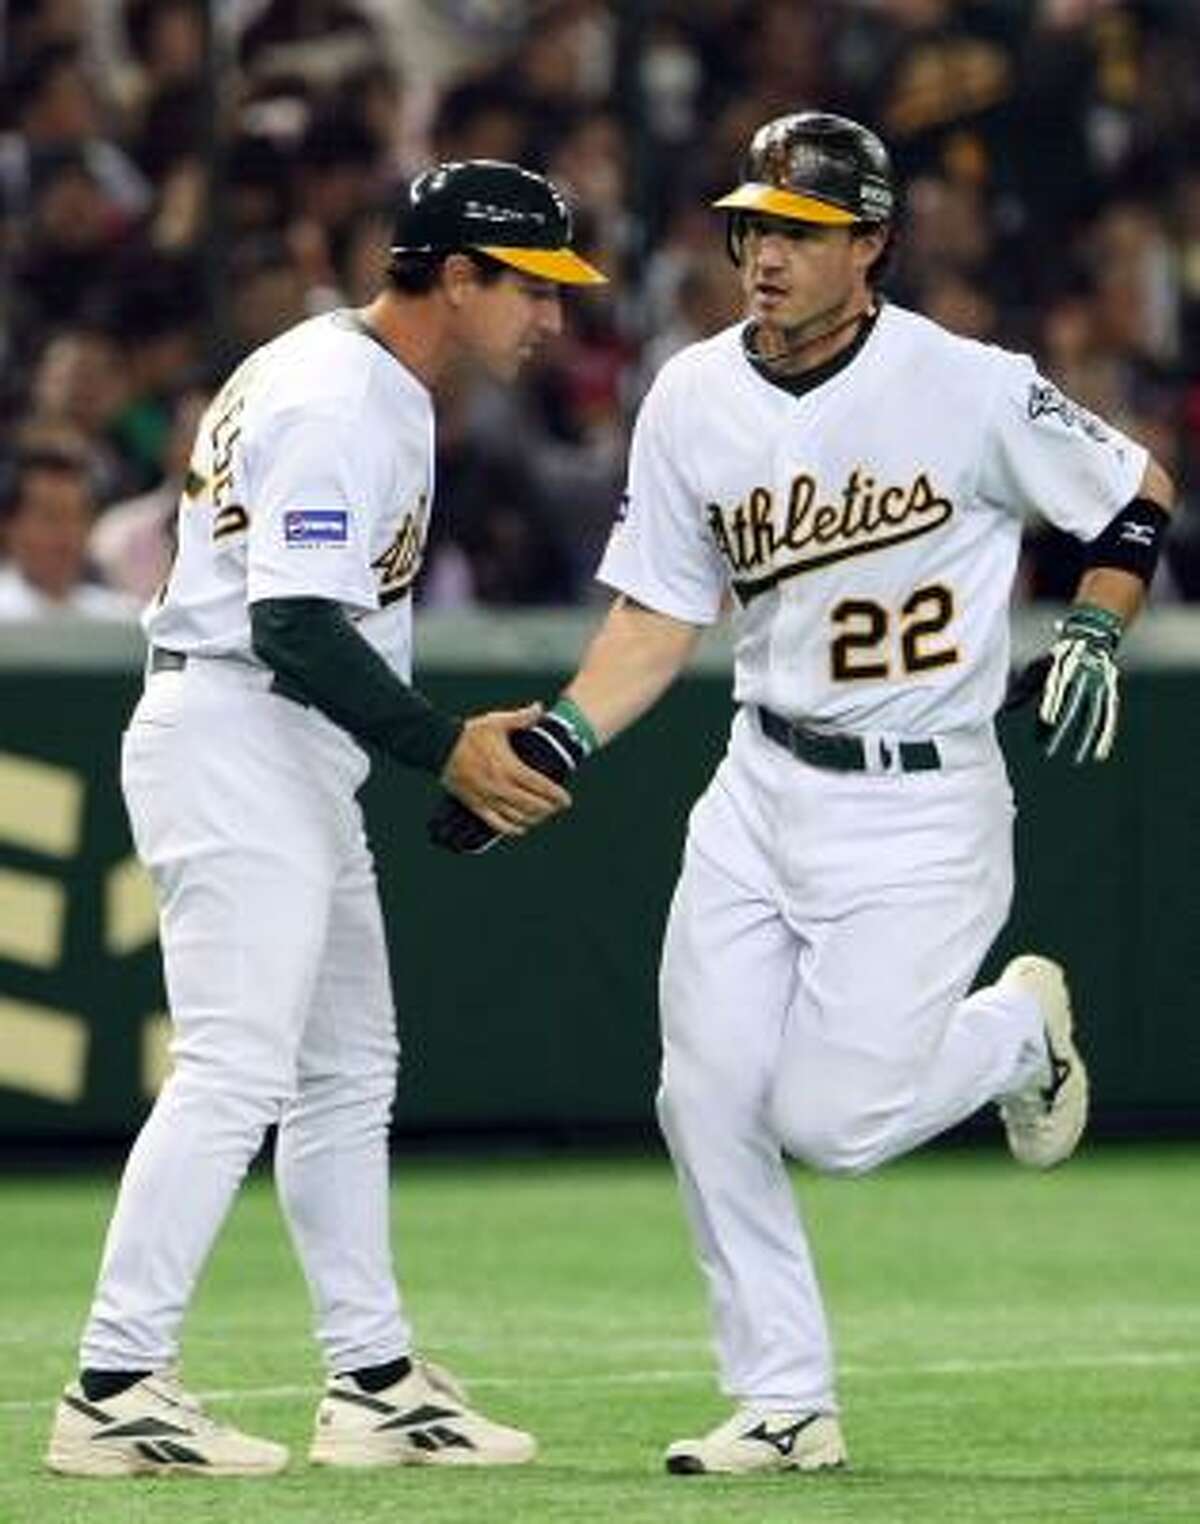 Tony DeFrancesco, left, served as third base coach for the A's in 2008.